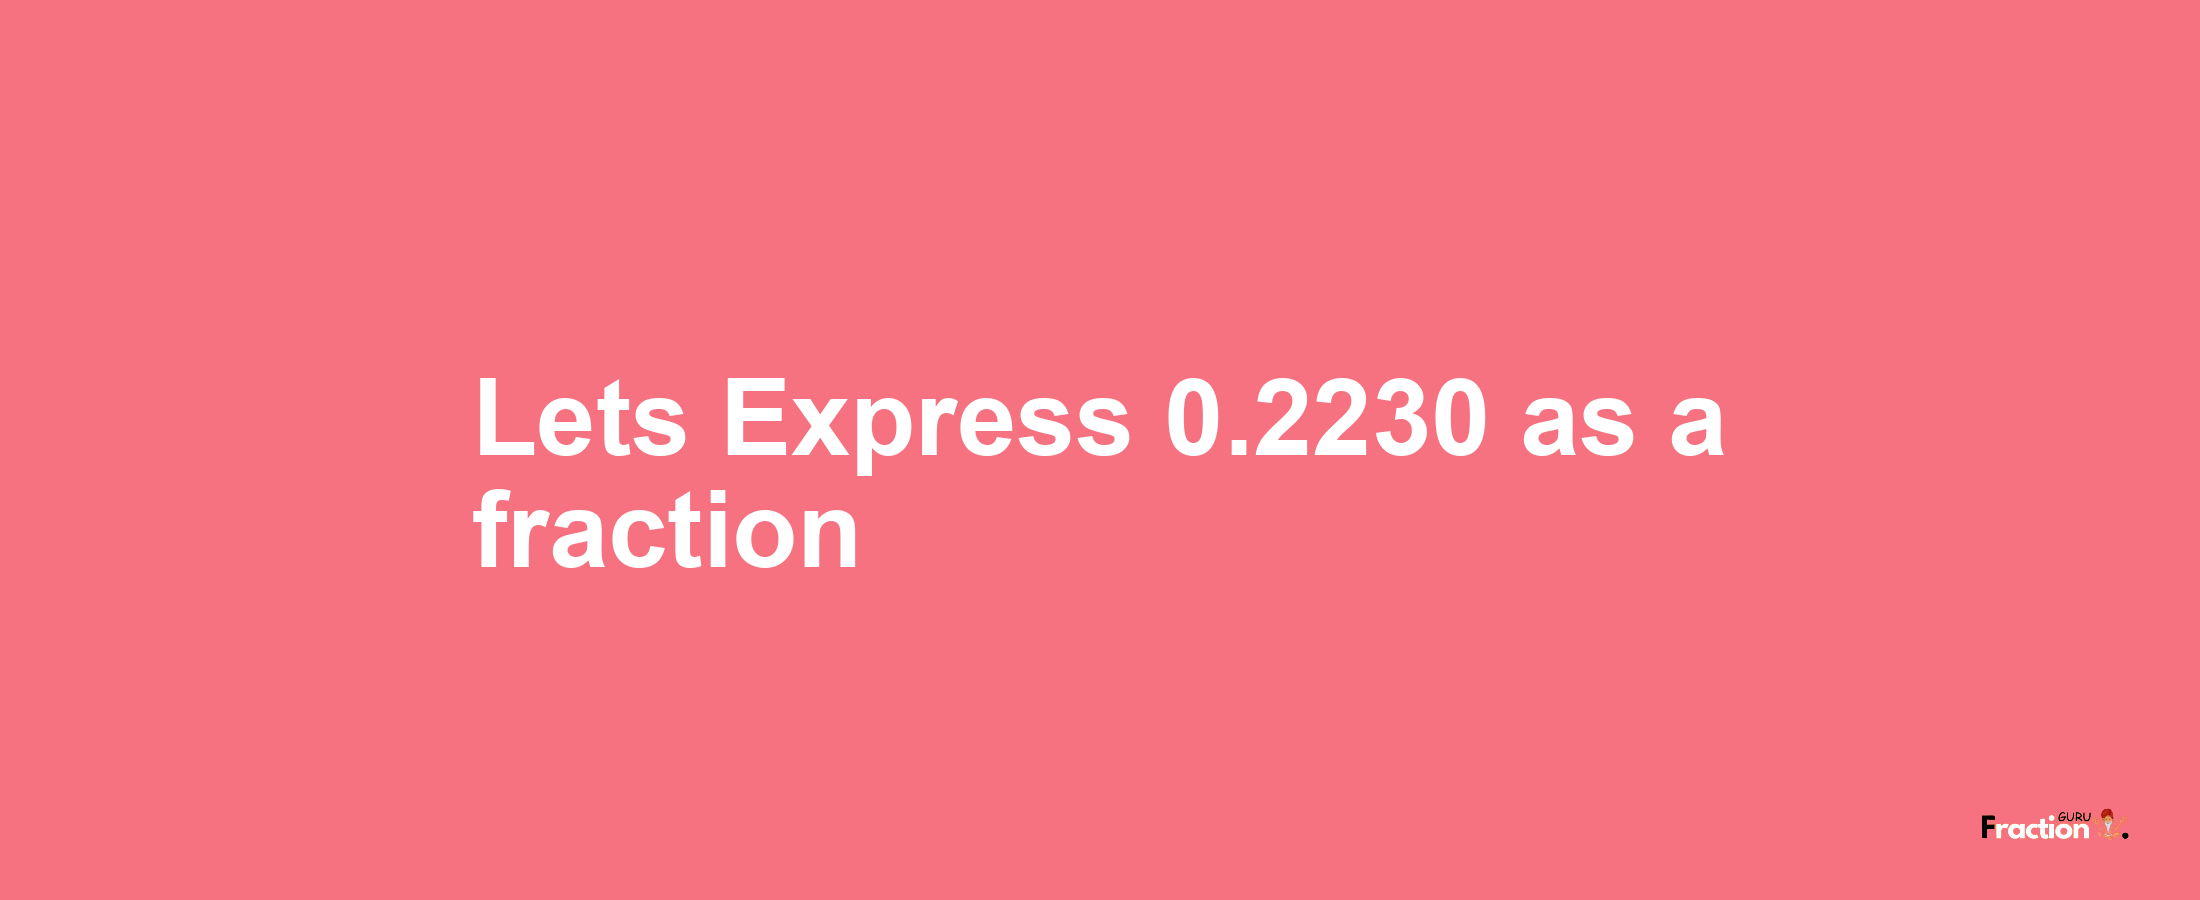 Lets Express 0.2230 as afraction